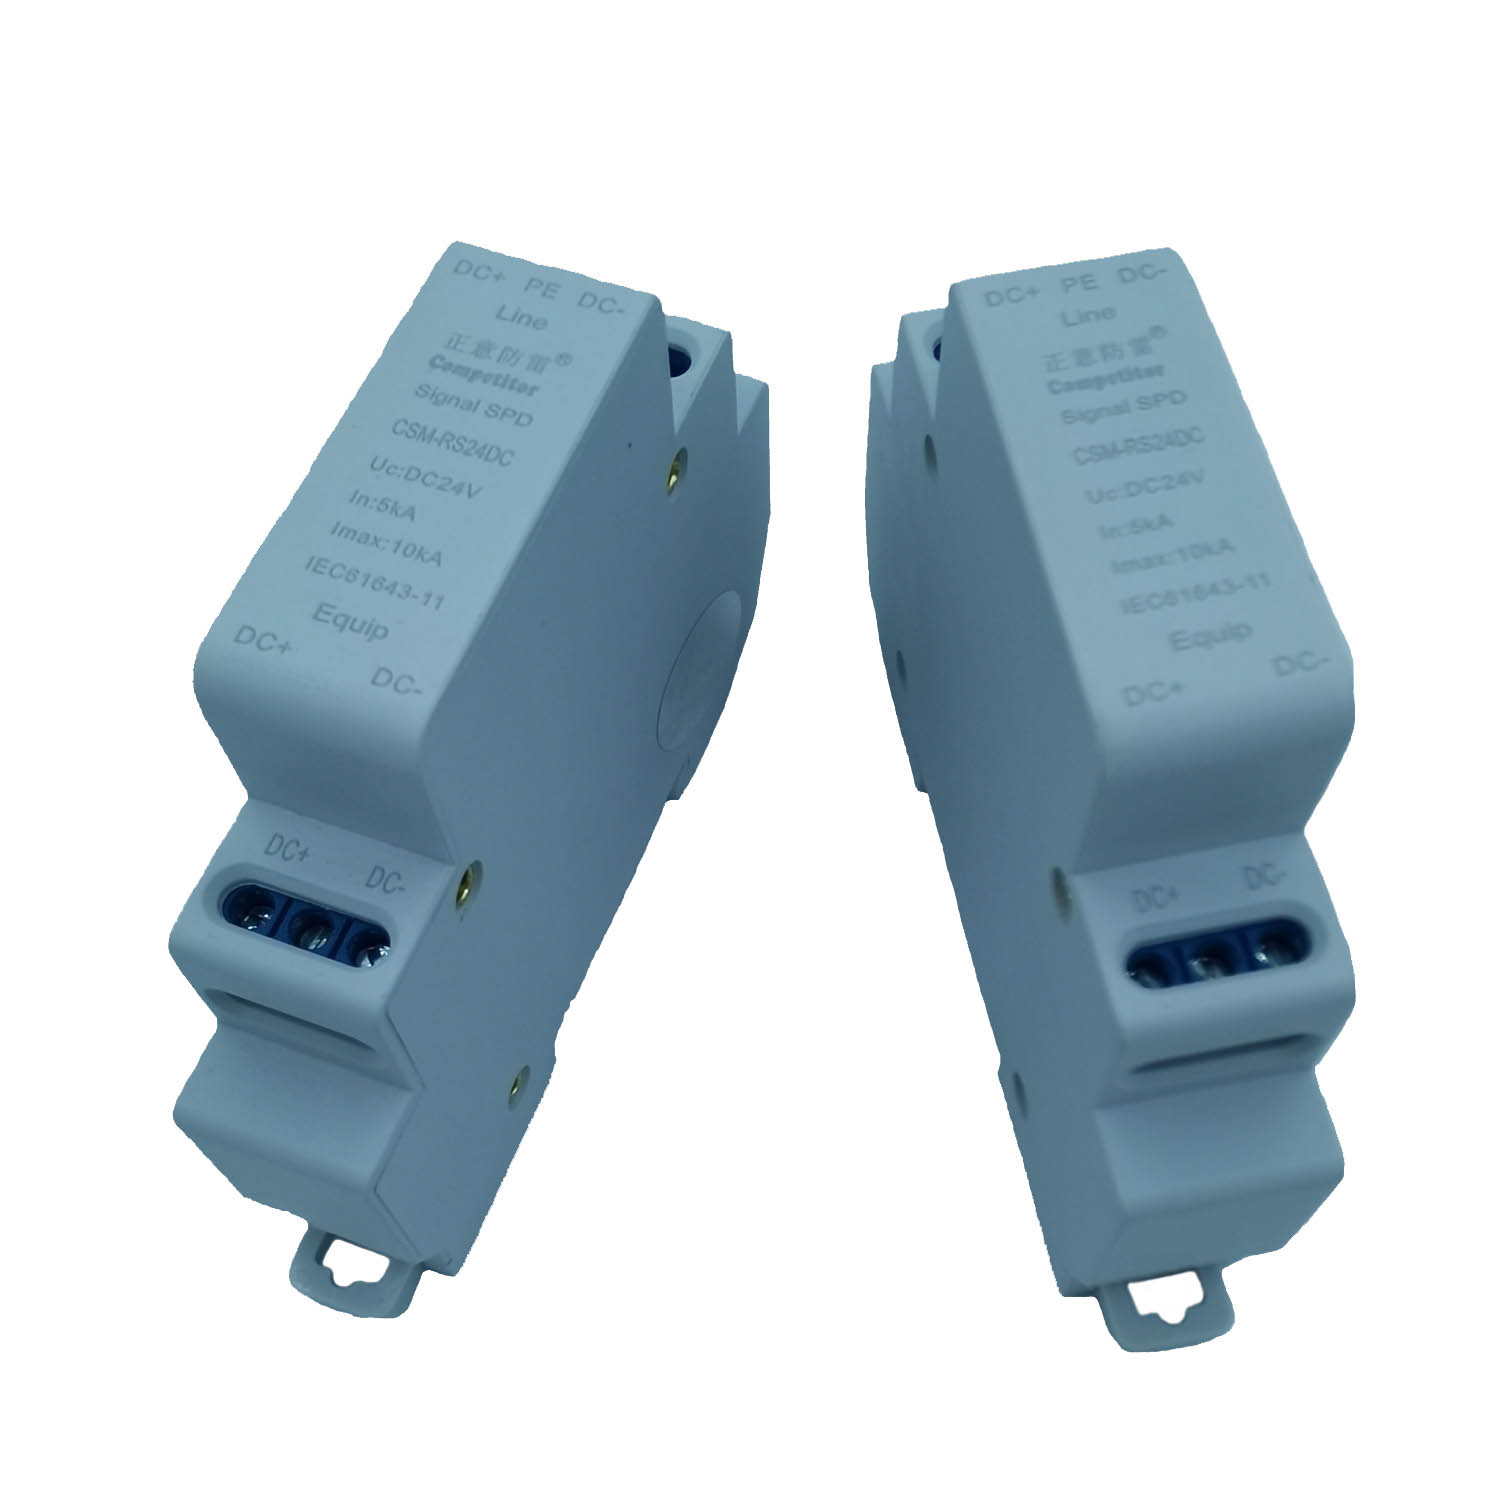 CSM Series Signal Surge Protection Device